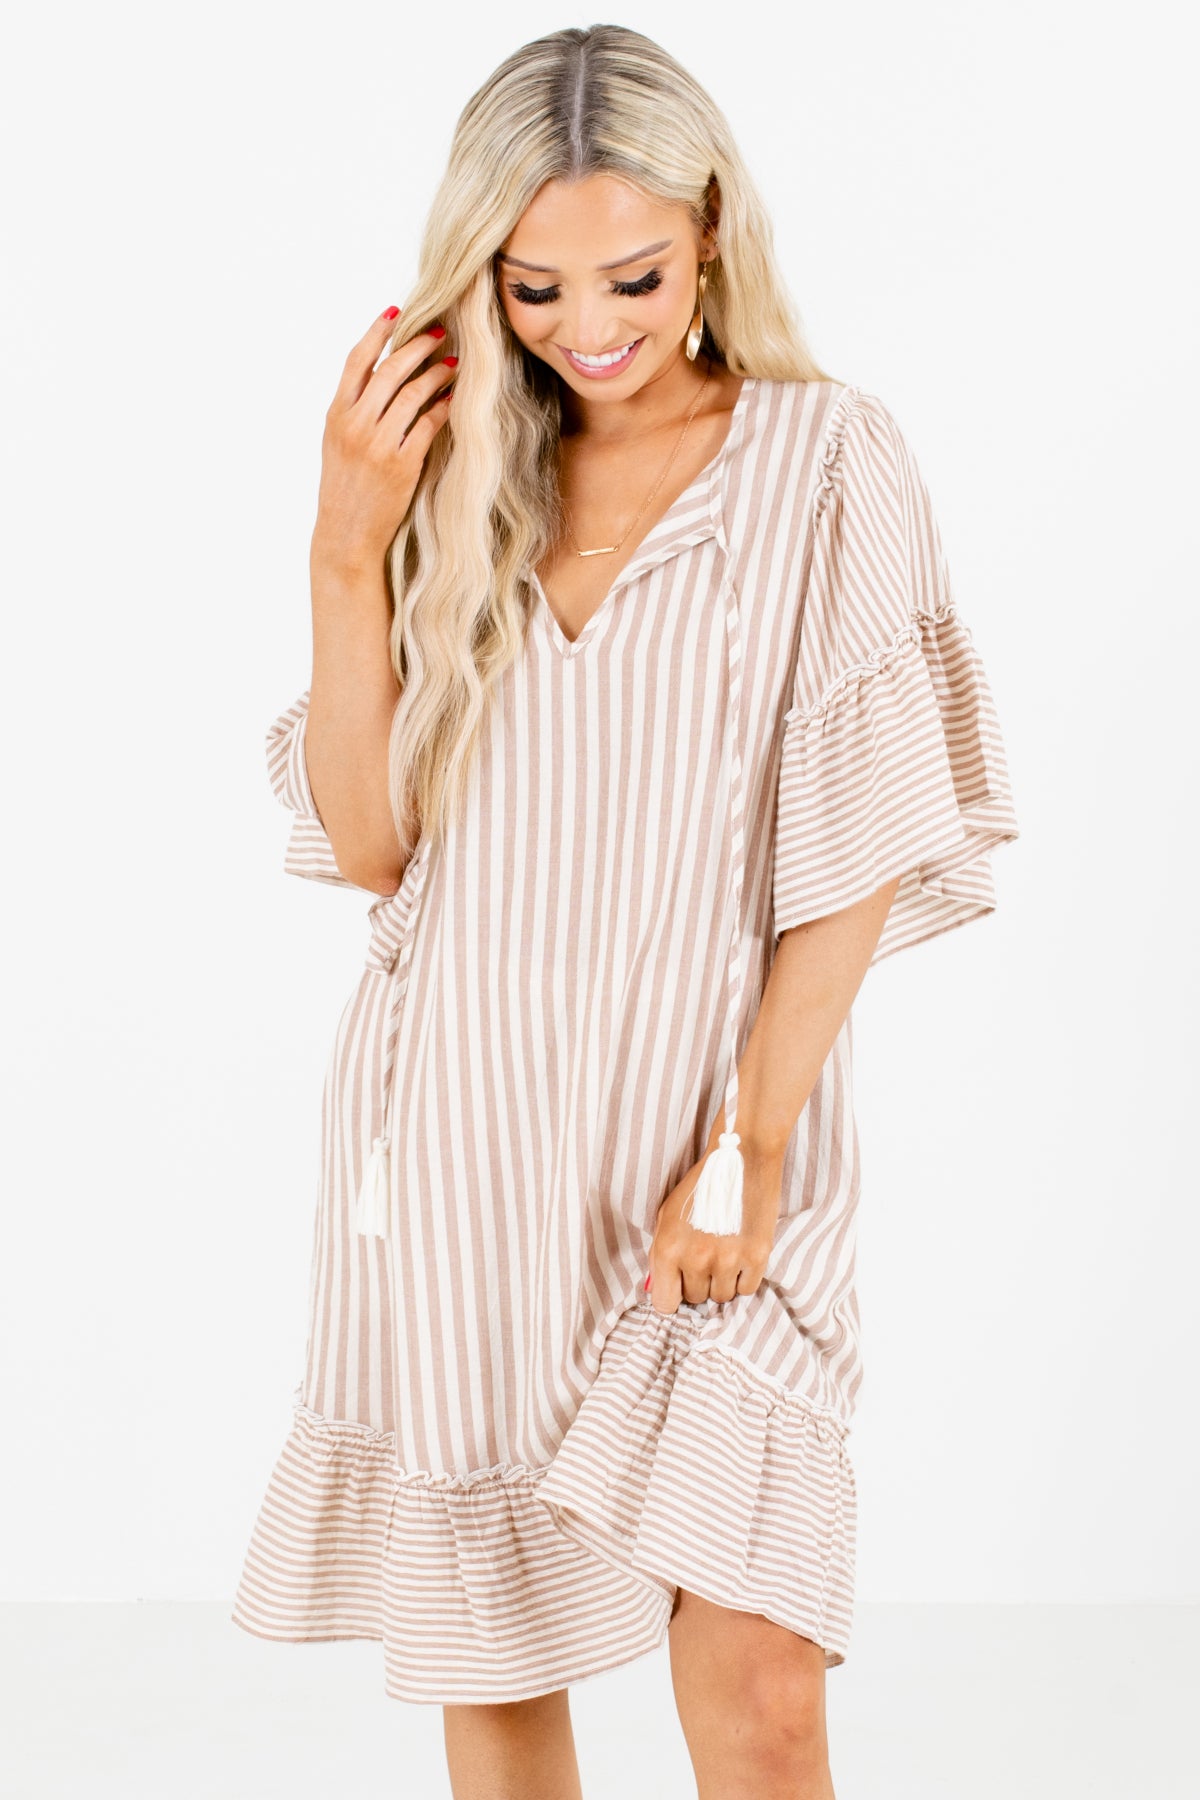 Brown and White Striped Boutique Knee-Length Dresses for Women